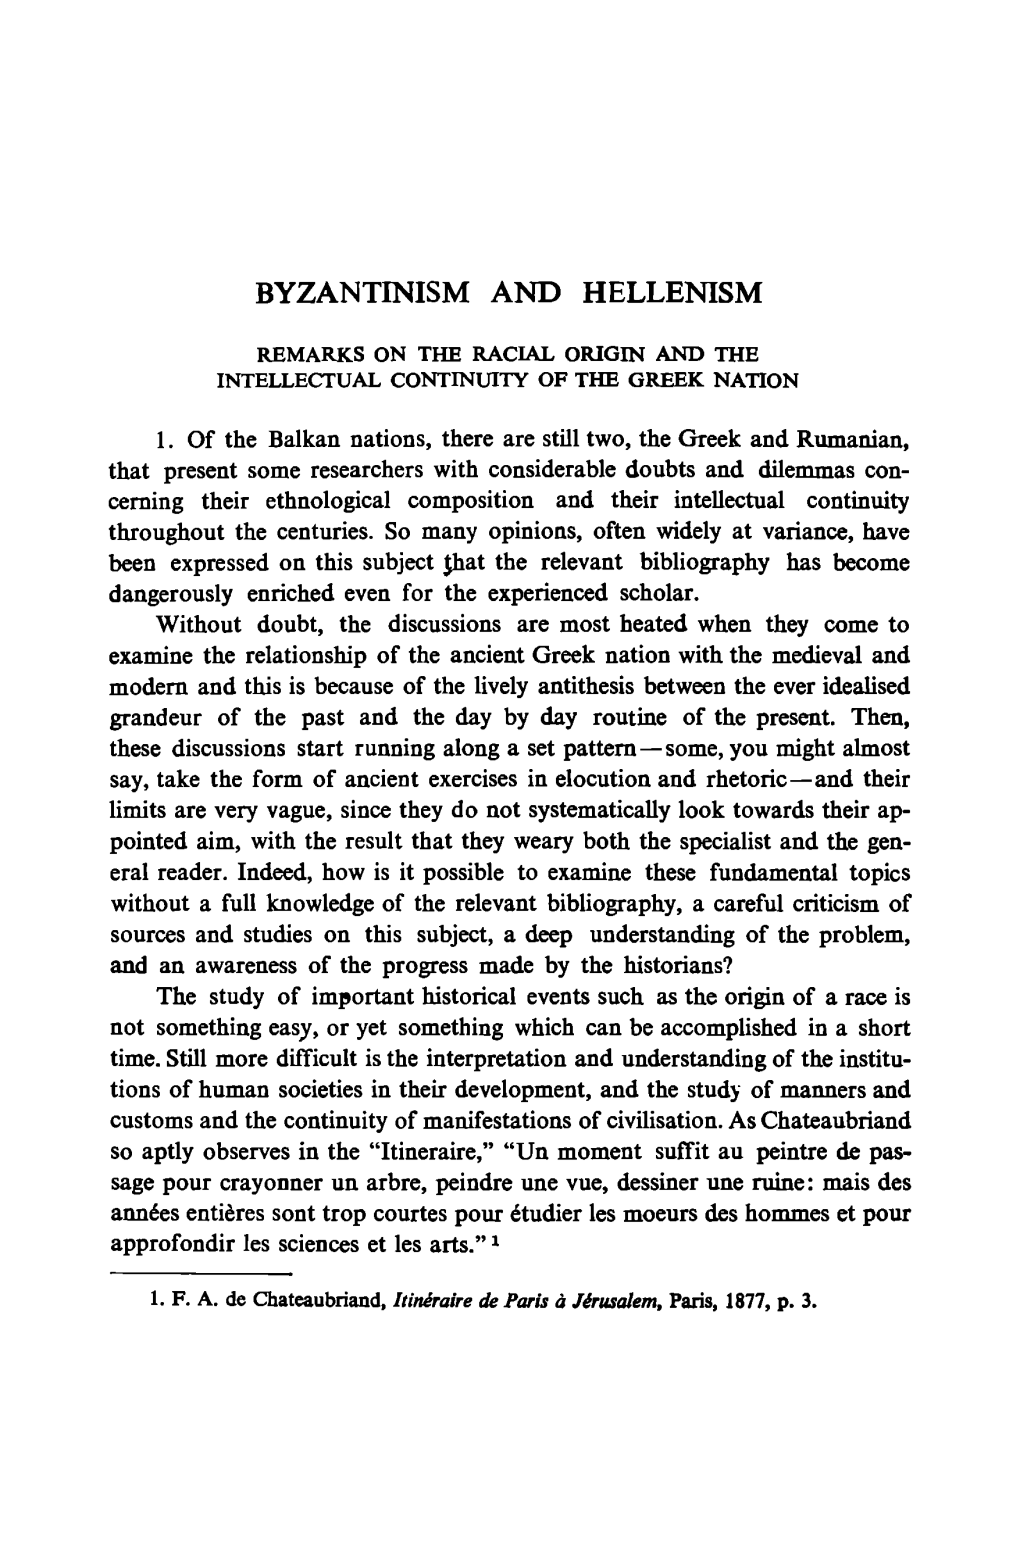 Byzantinism and Hellenism